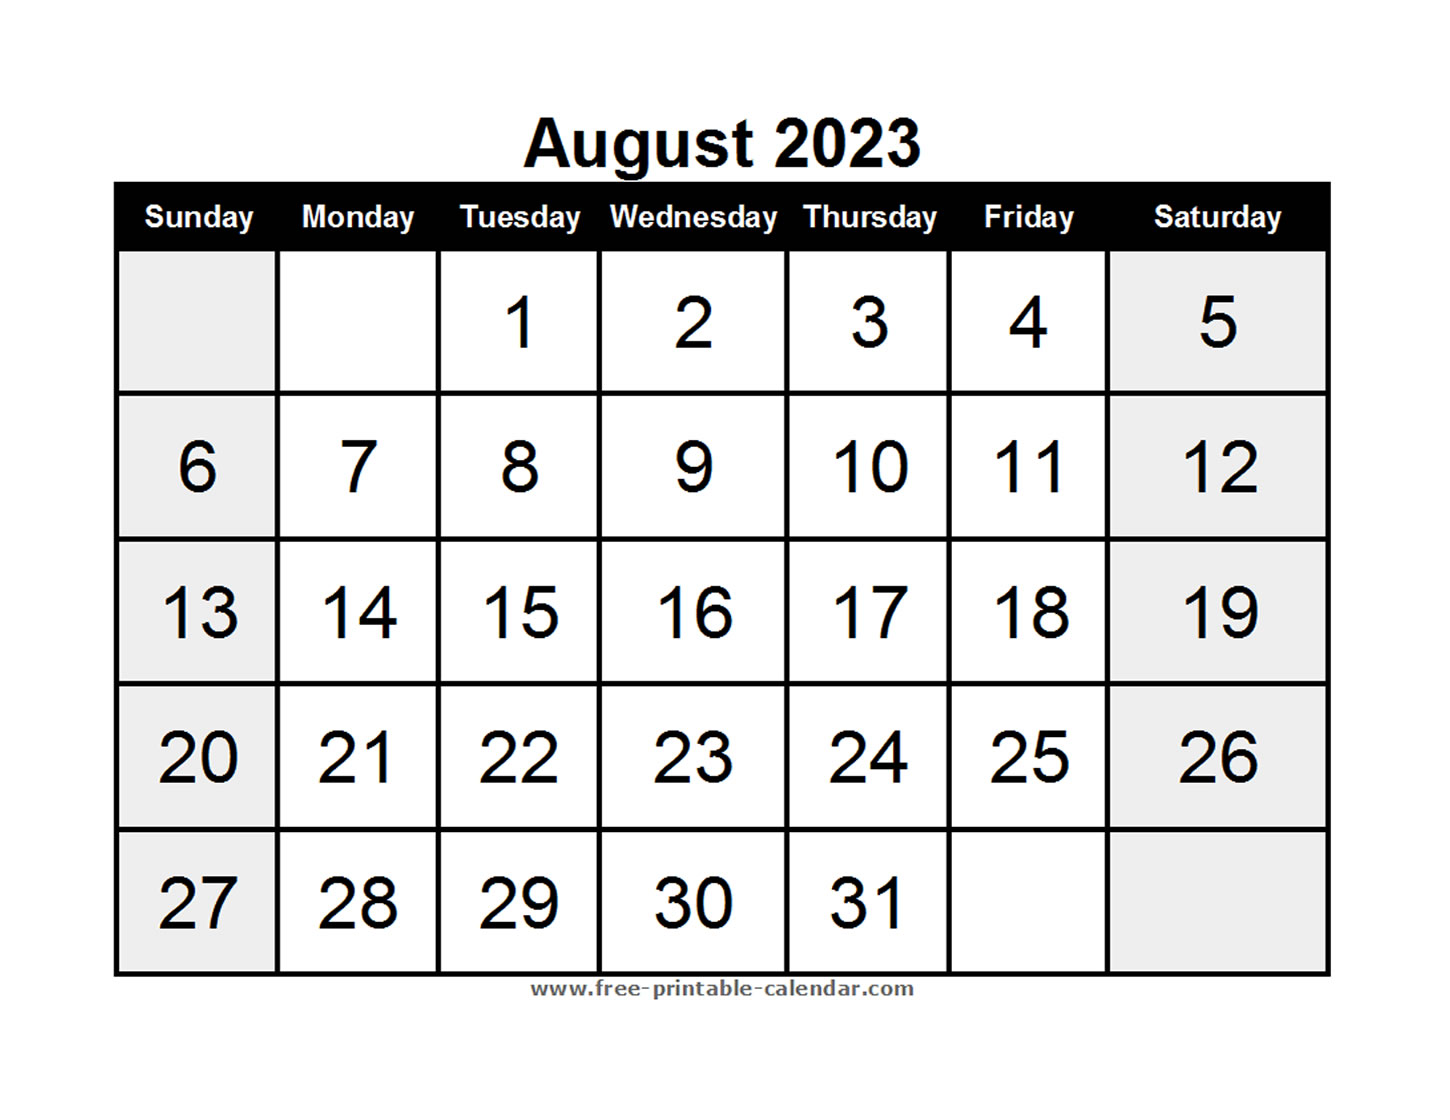 Free Printable Calendar August 2023 With Lines